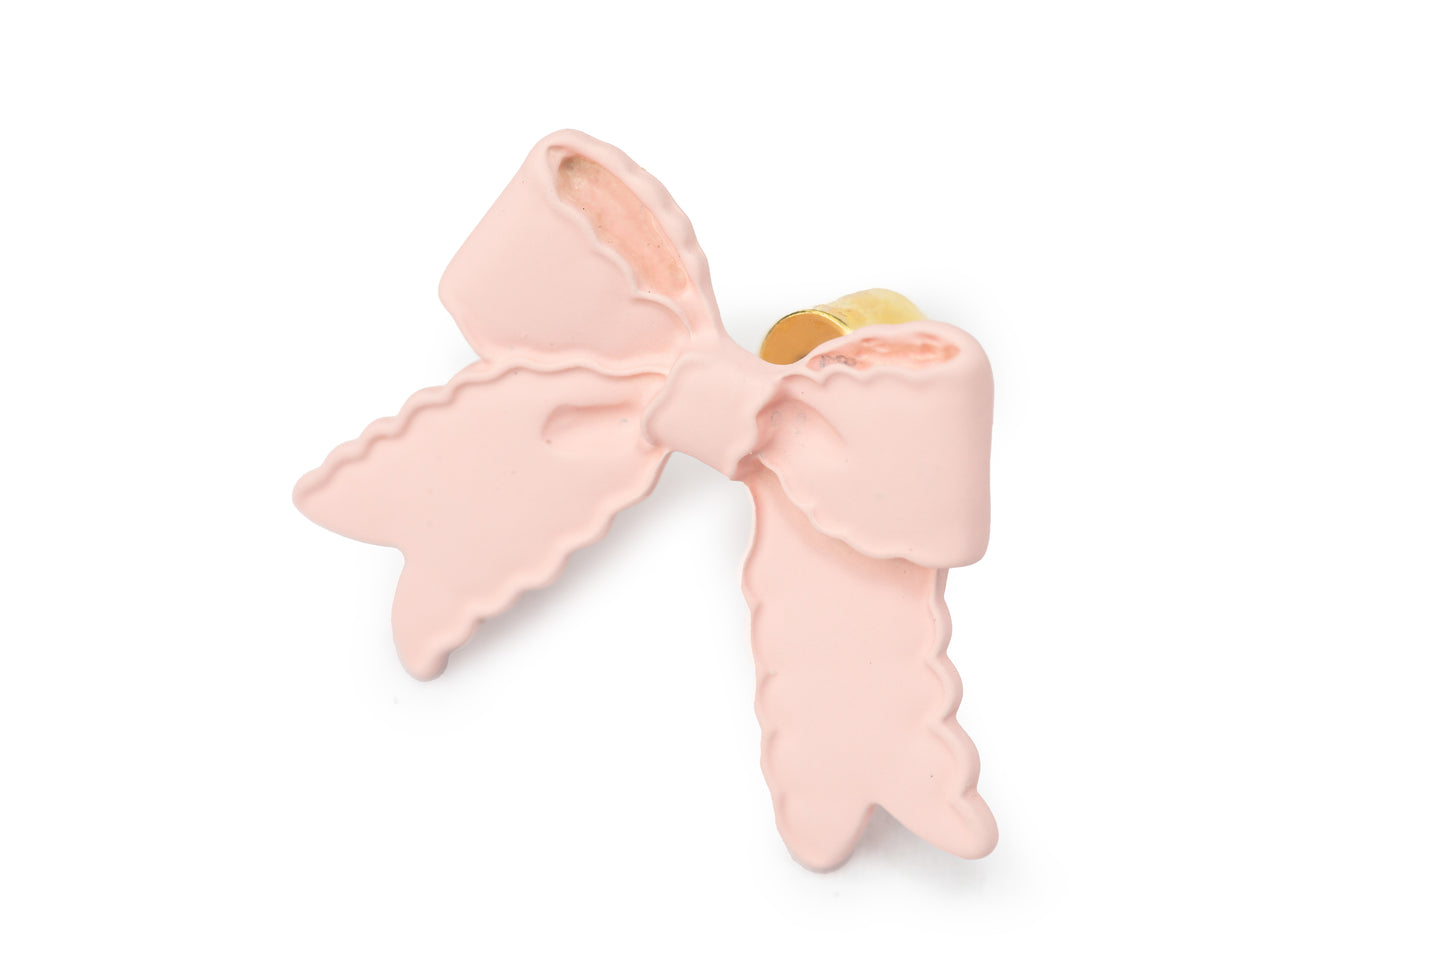 Pinky Bow Studs - Pink Studs for Women